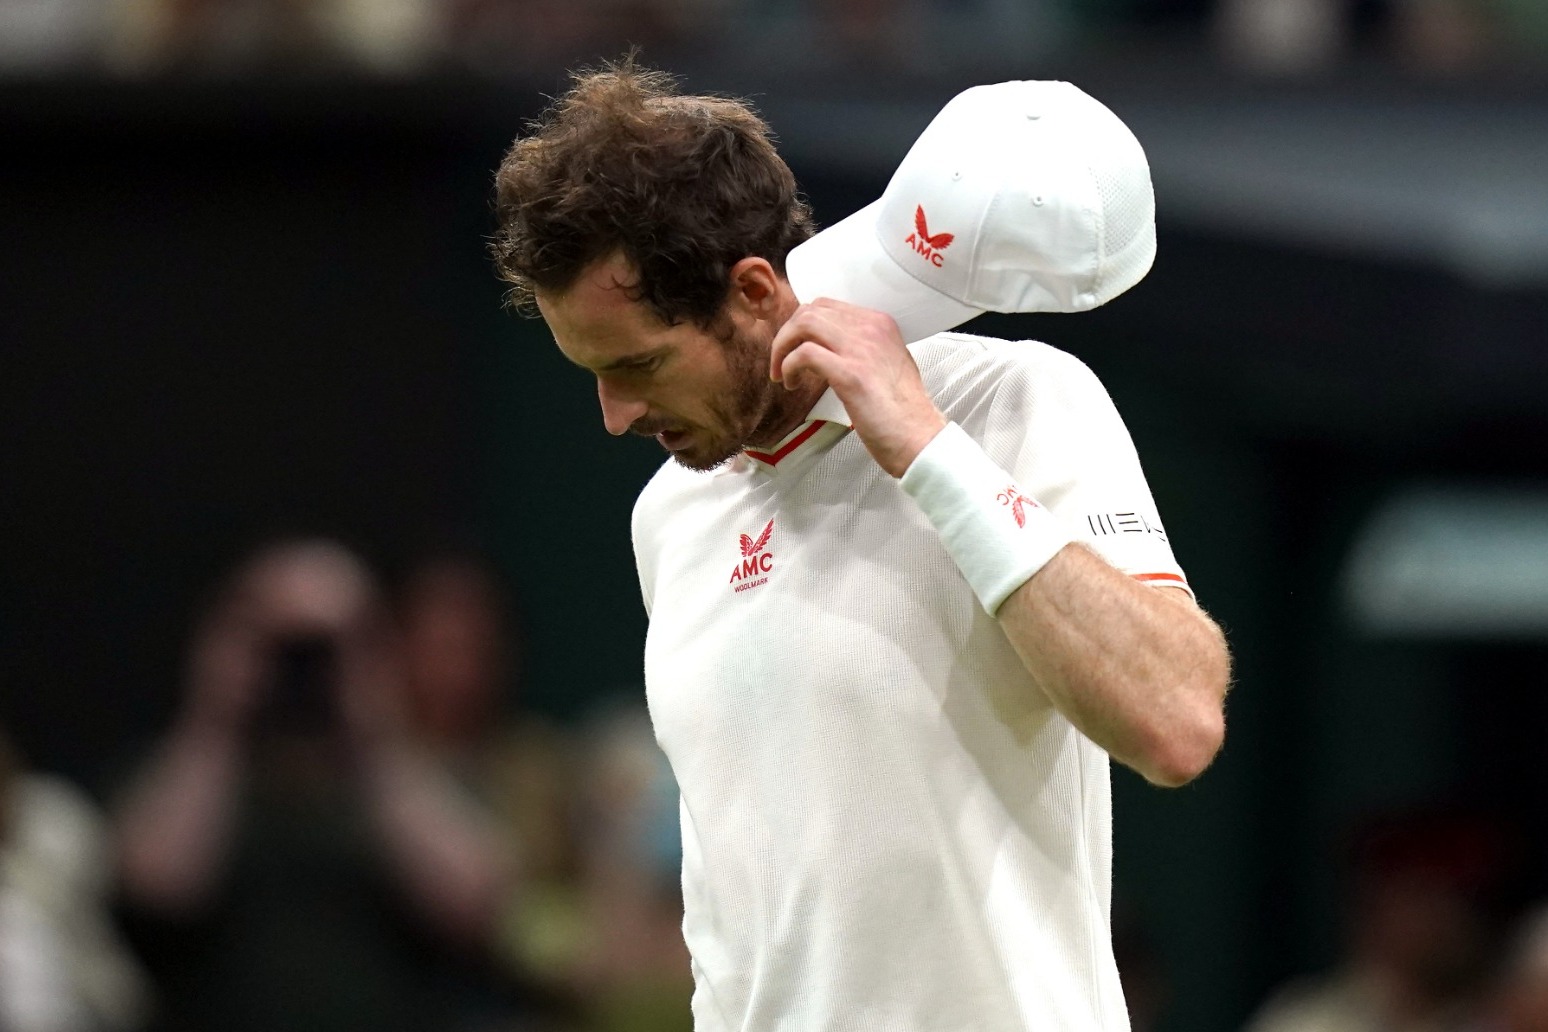 Andy Murray to miss French Open and start preparations for Wimbledon 